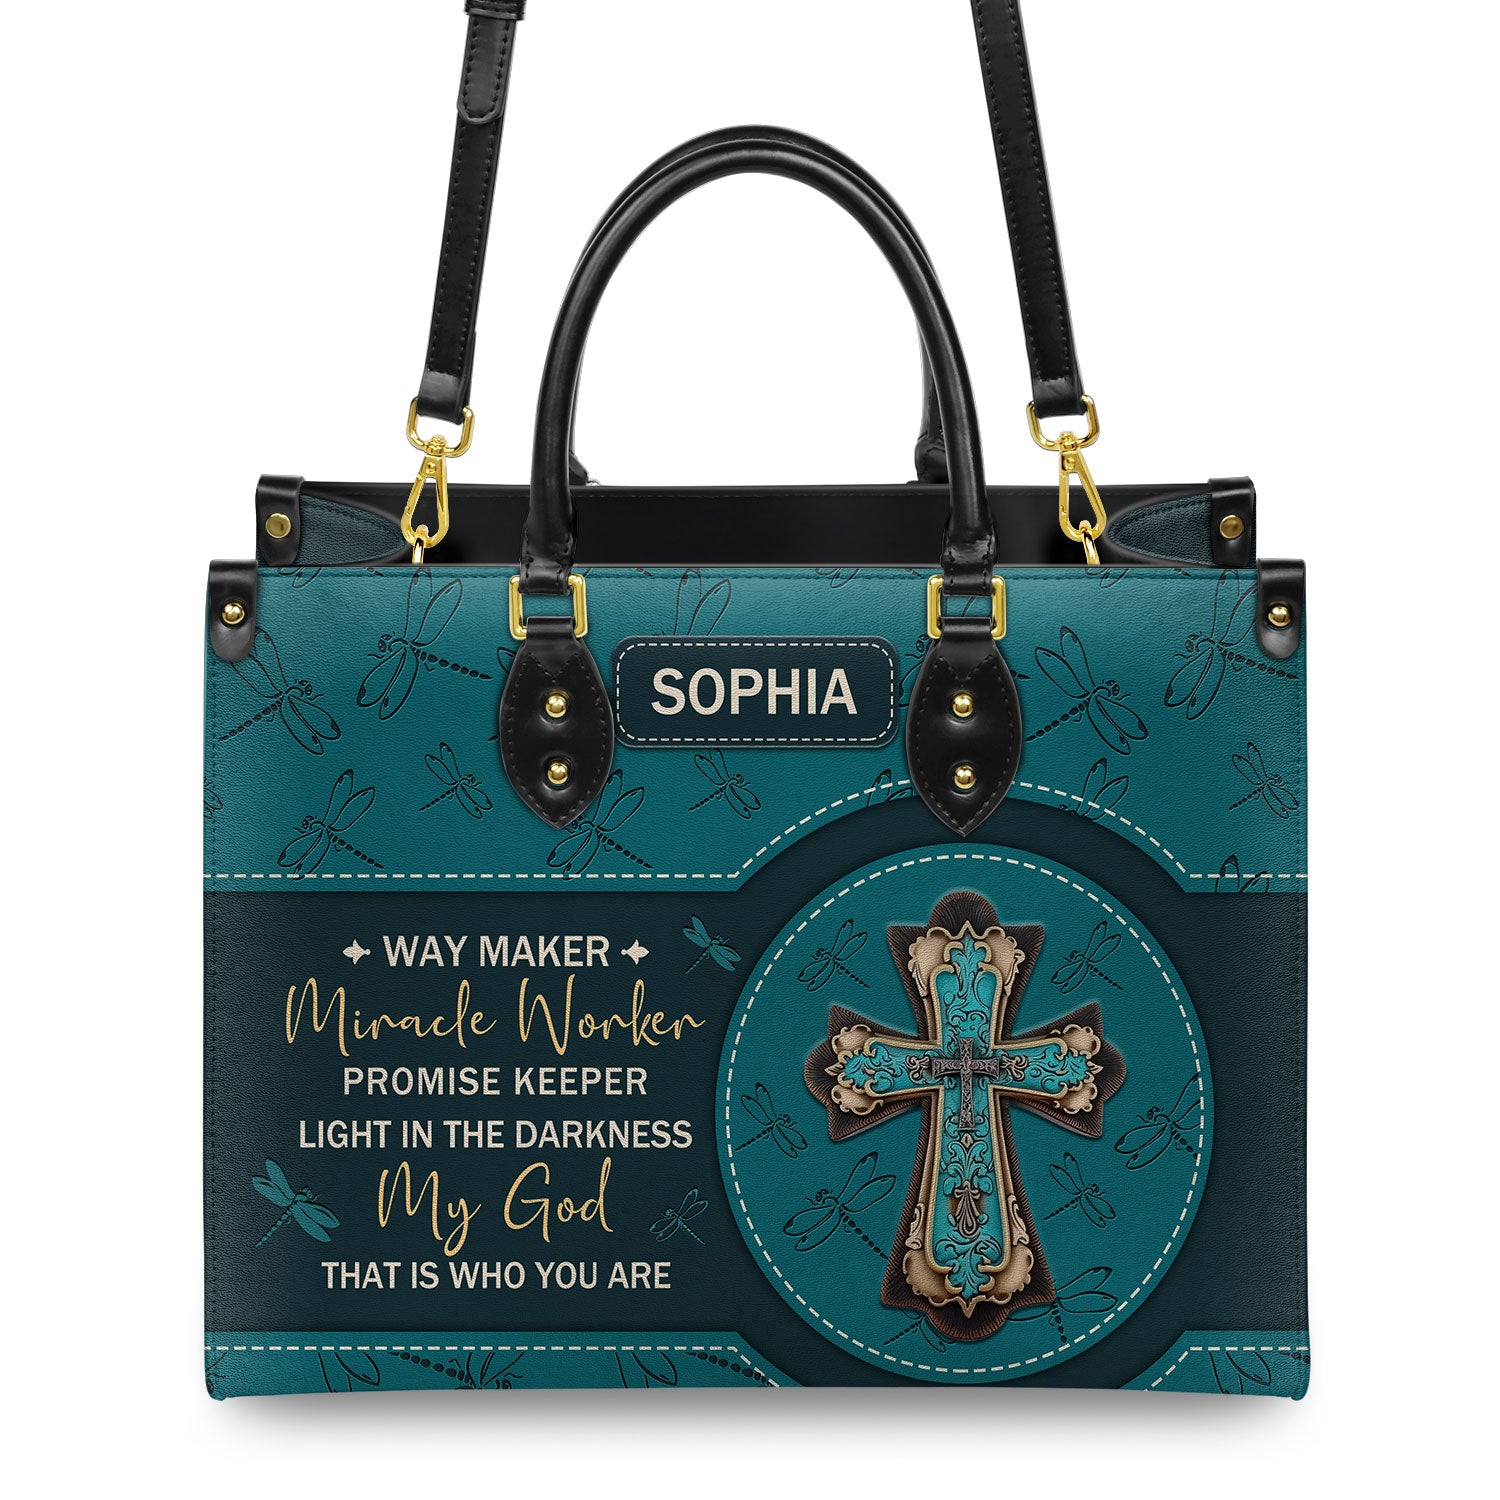 Jesuspirit | Way Maker And Miracle Worker | Personalized Large Leather